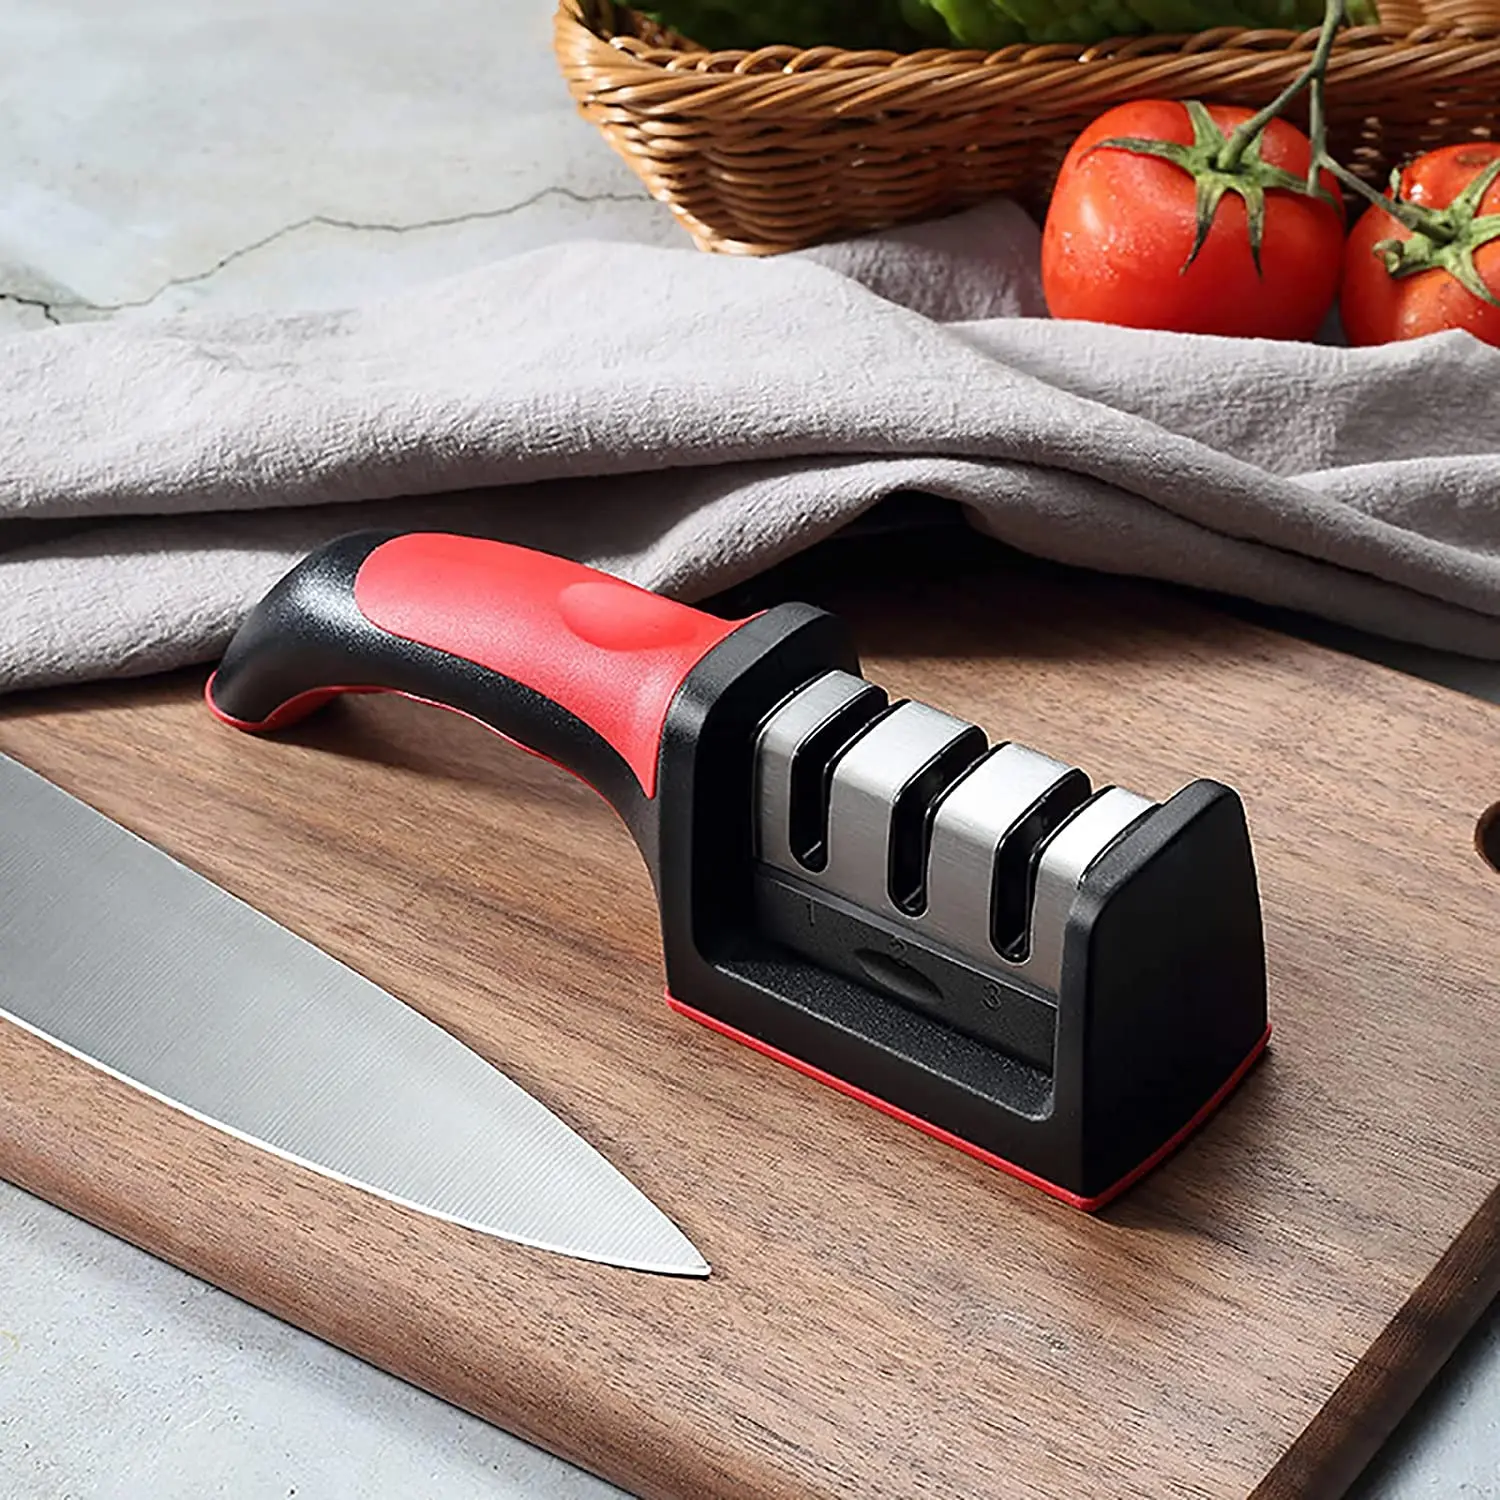 3-Stage Kitchen Knife Sharpener,Professional Knife Sharpening Tool to  Restore Non-Serrated Blades Quickly，Helps Repair, Restore and Polish Blades